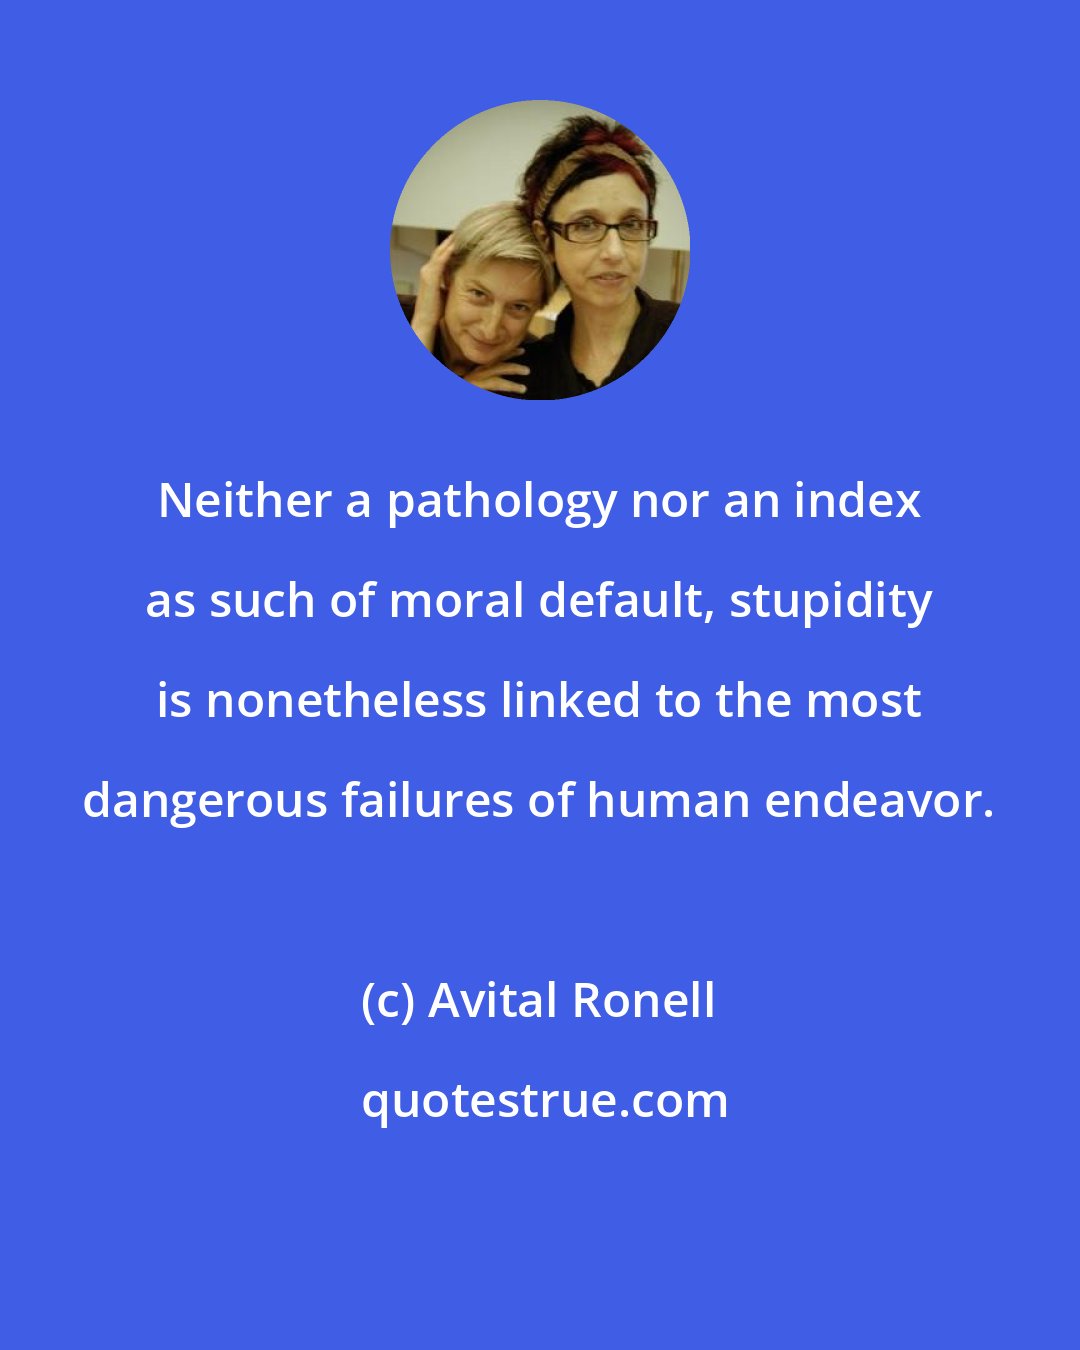 Avital Ronell: Neither a pathology nor an index as such of moral default, stupidity is nonetheless linked to the most dangerous failures of human endeavor.